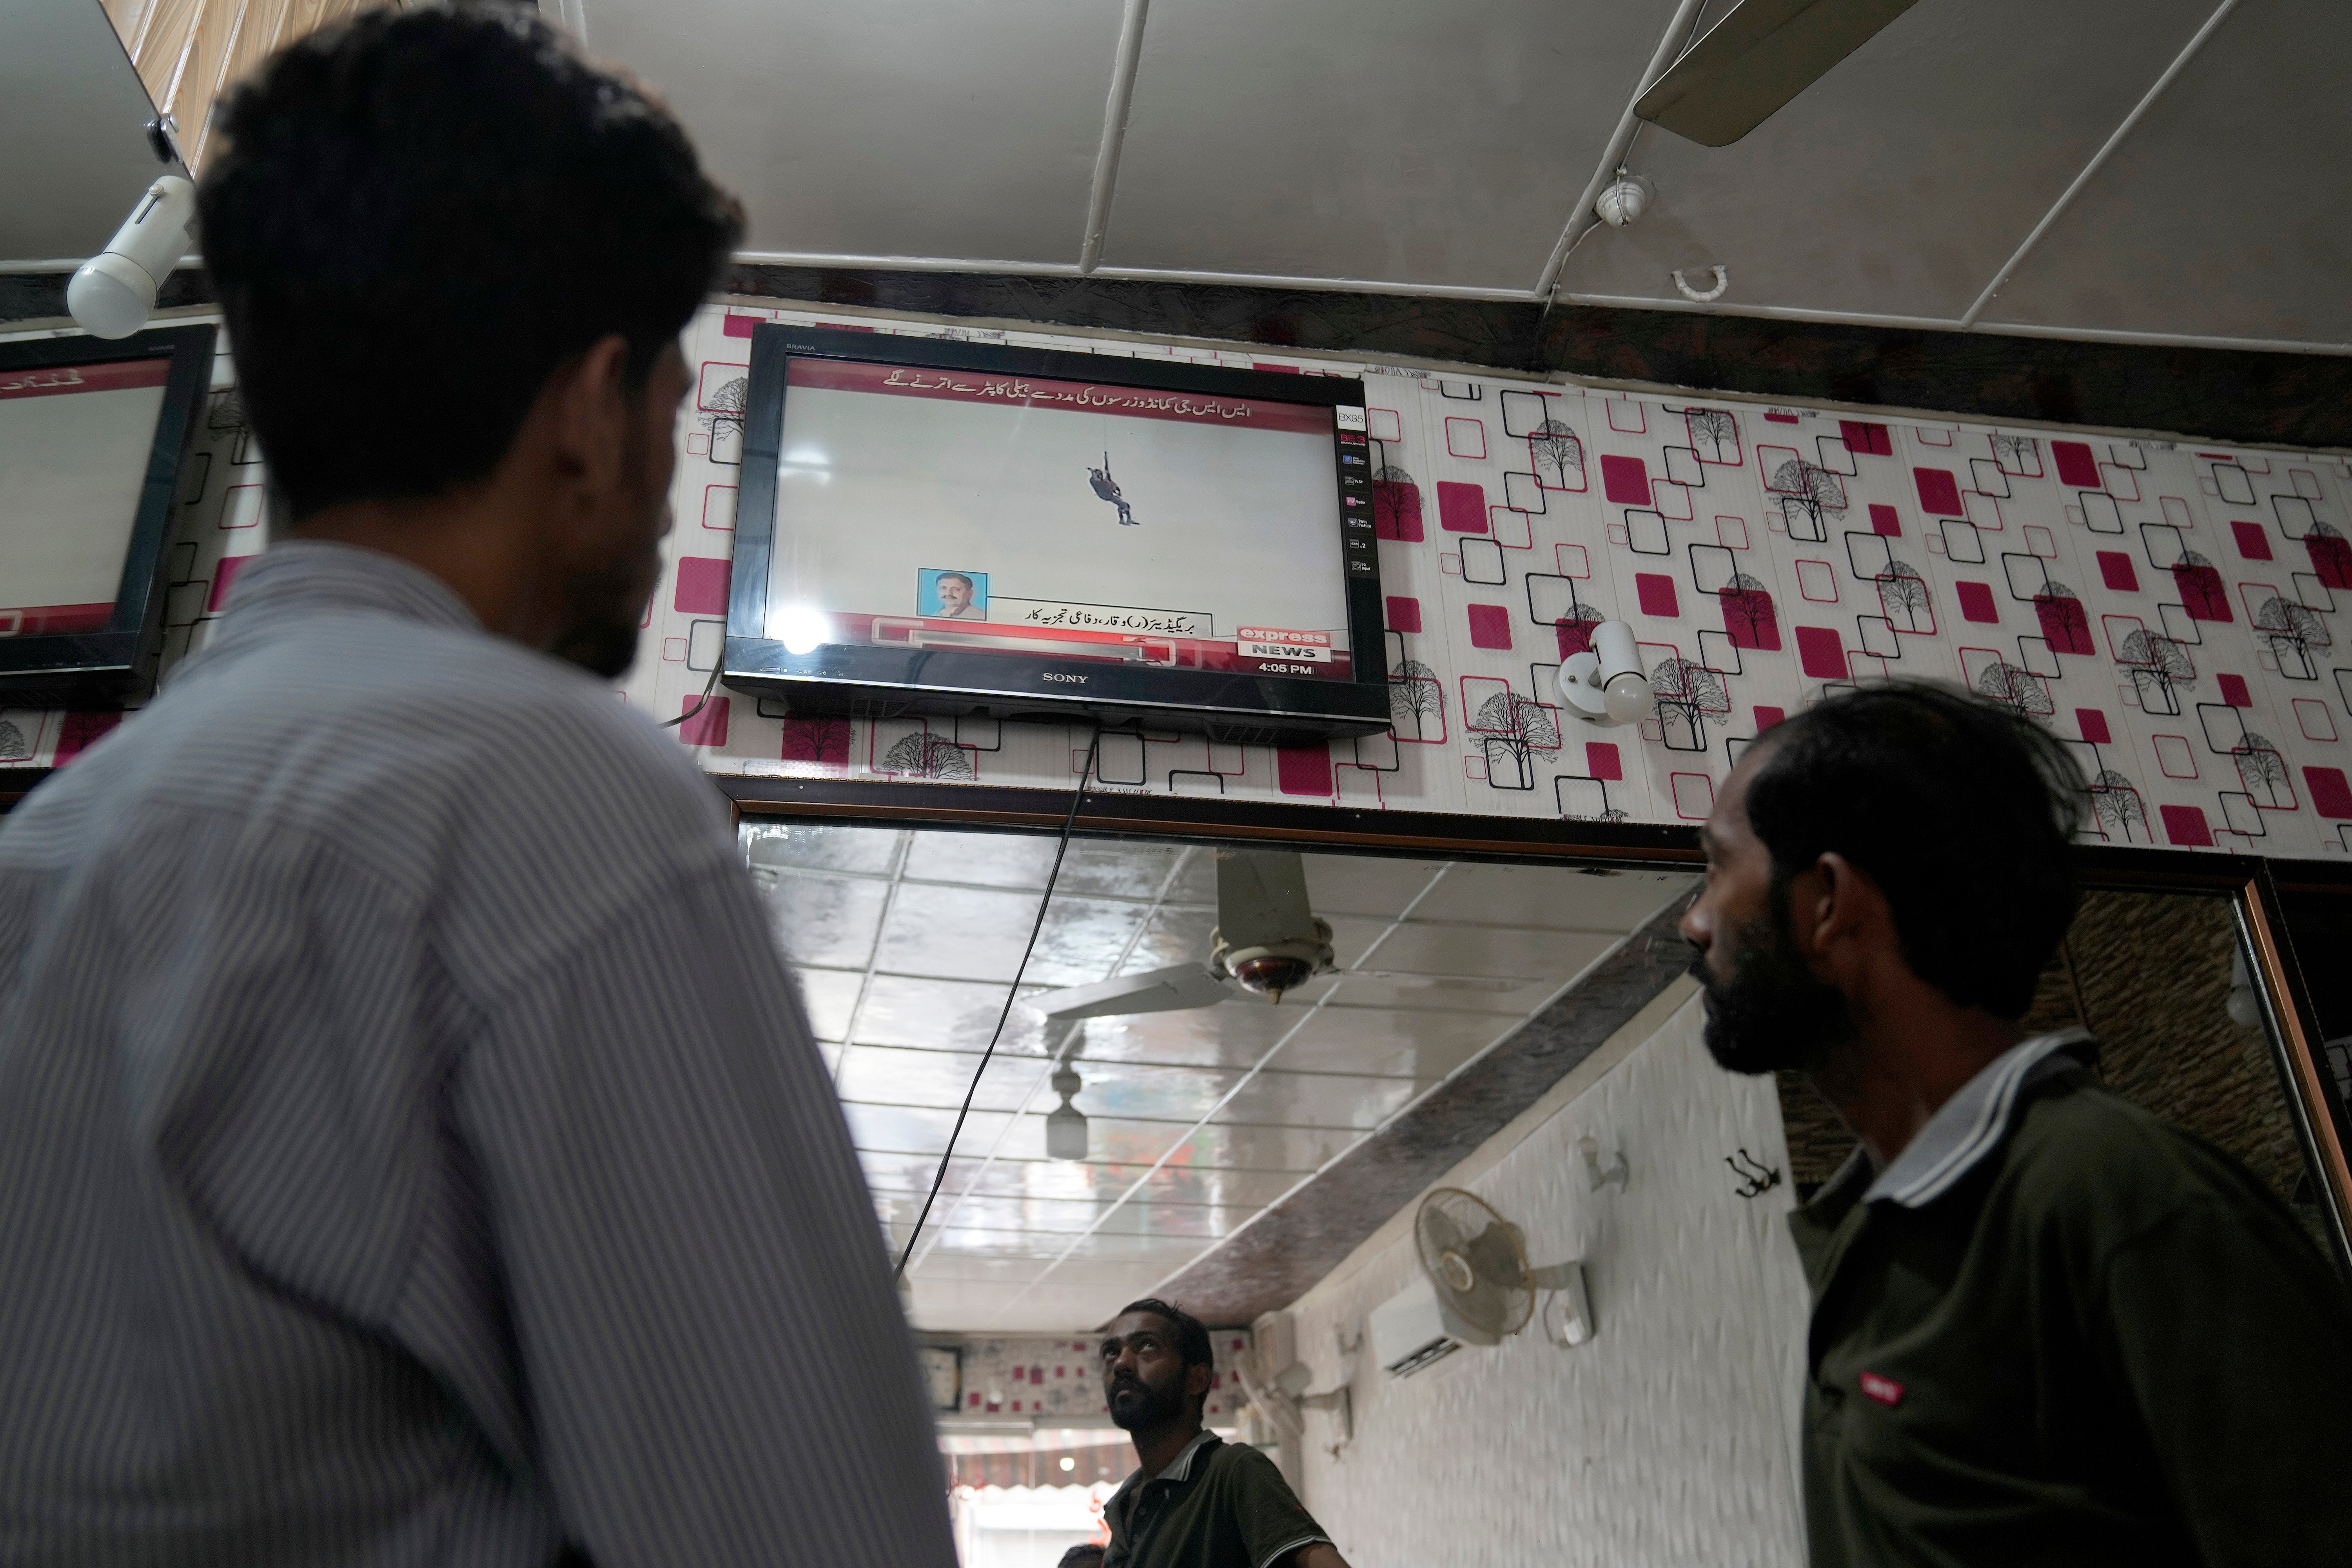 People were watching a news channel broadcasting information about the rescue, at a barber shop in Lahore